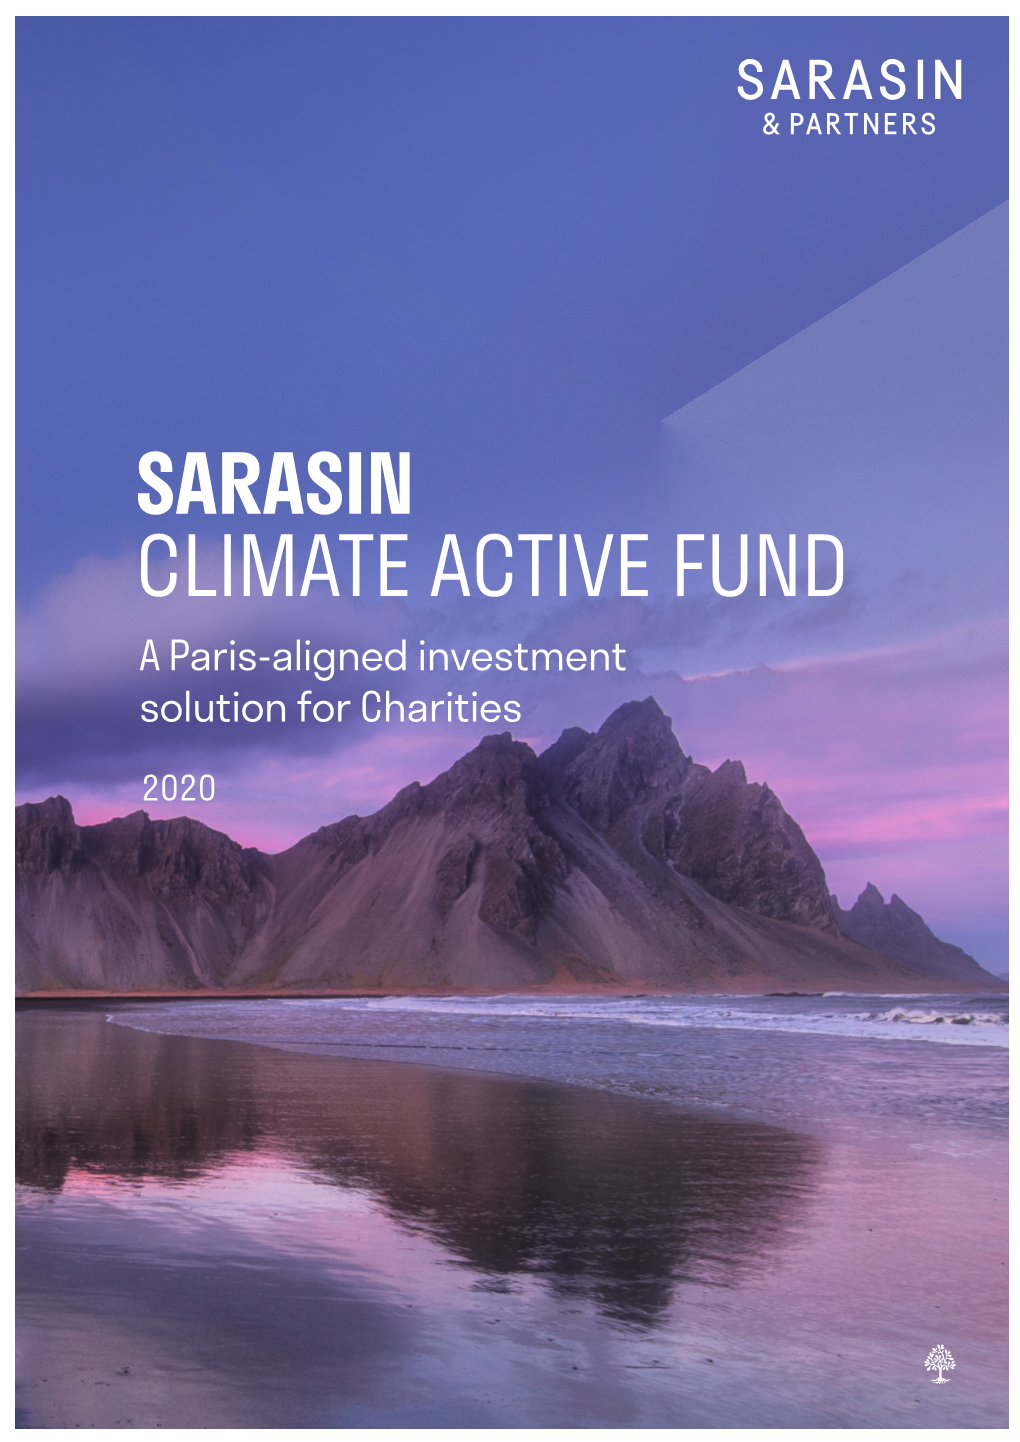 SARASIN CLIMATE ACTIVE FUND a Paris-Aligned Investment Solution for Charities